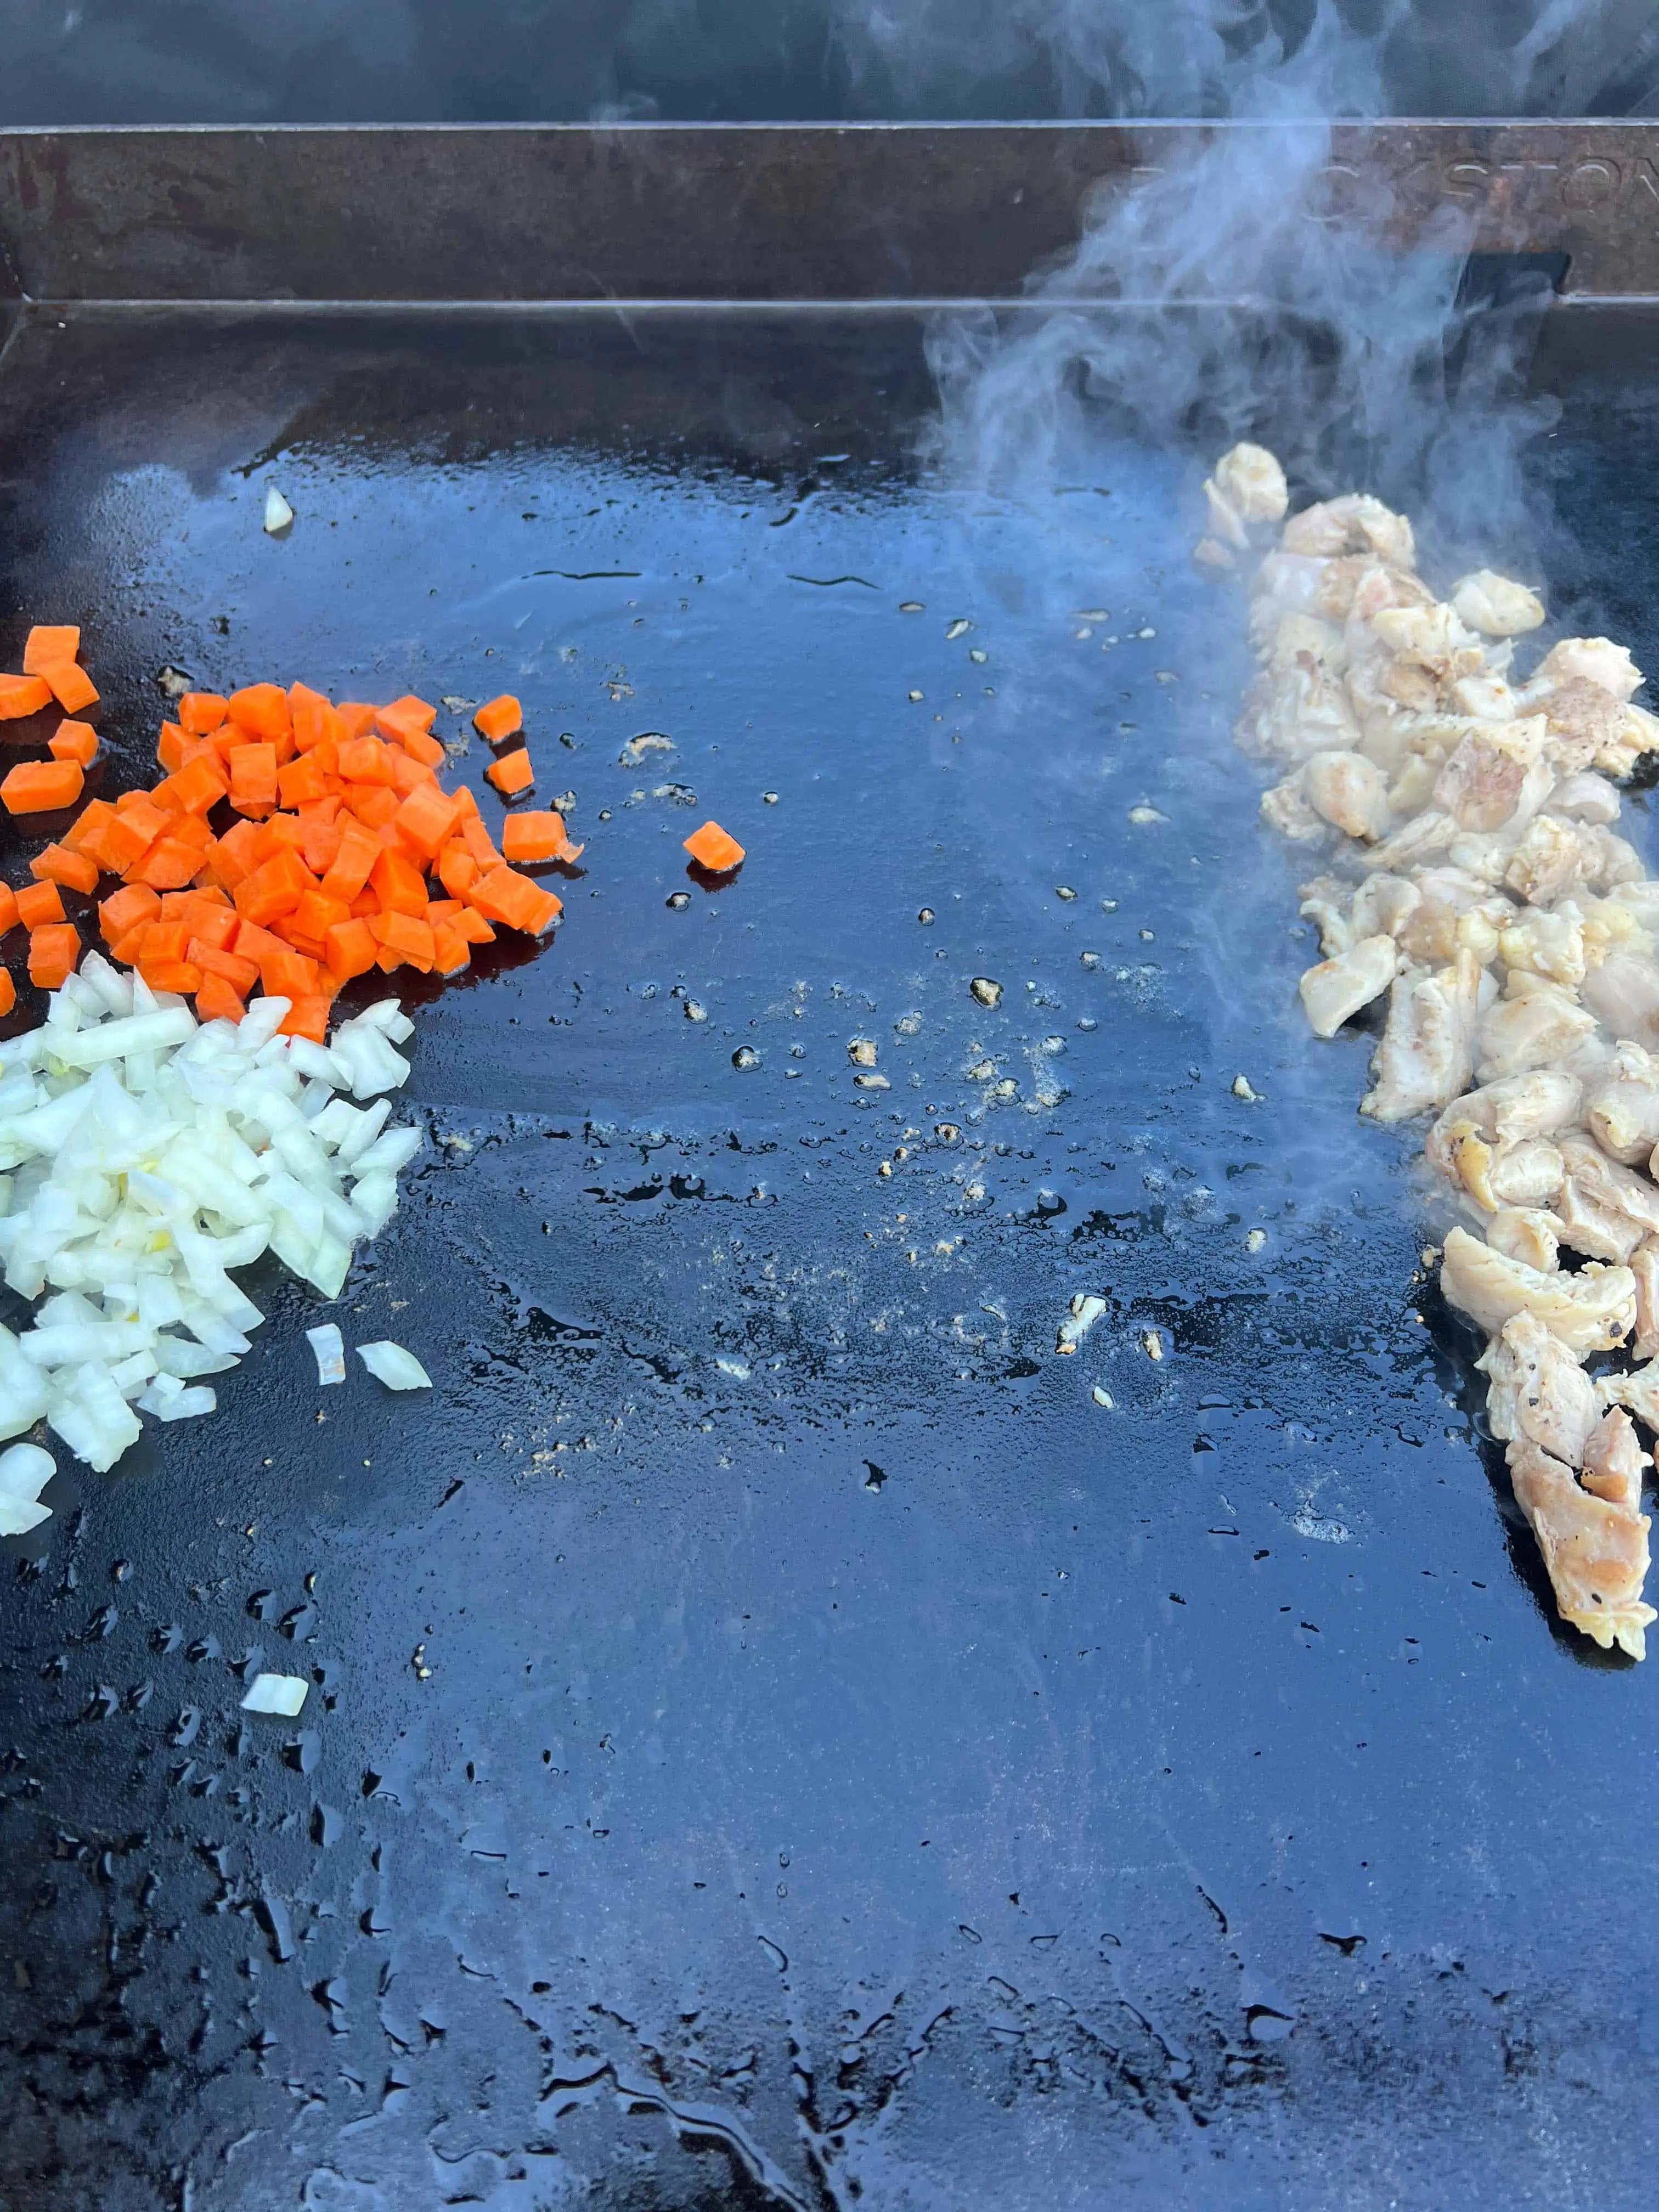 sauteeing the veg while the chopped chicken cooks